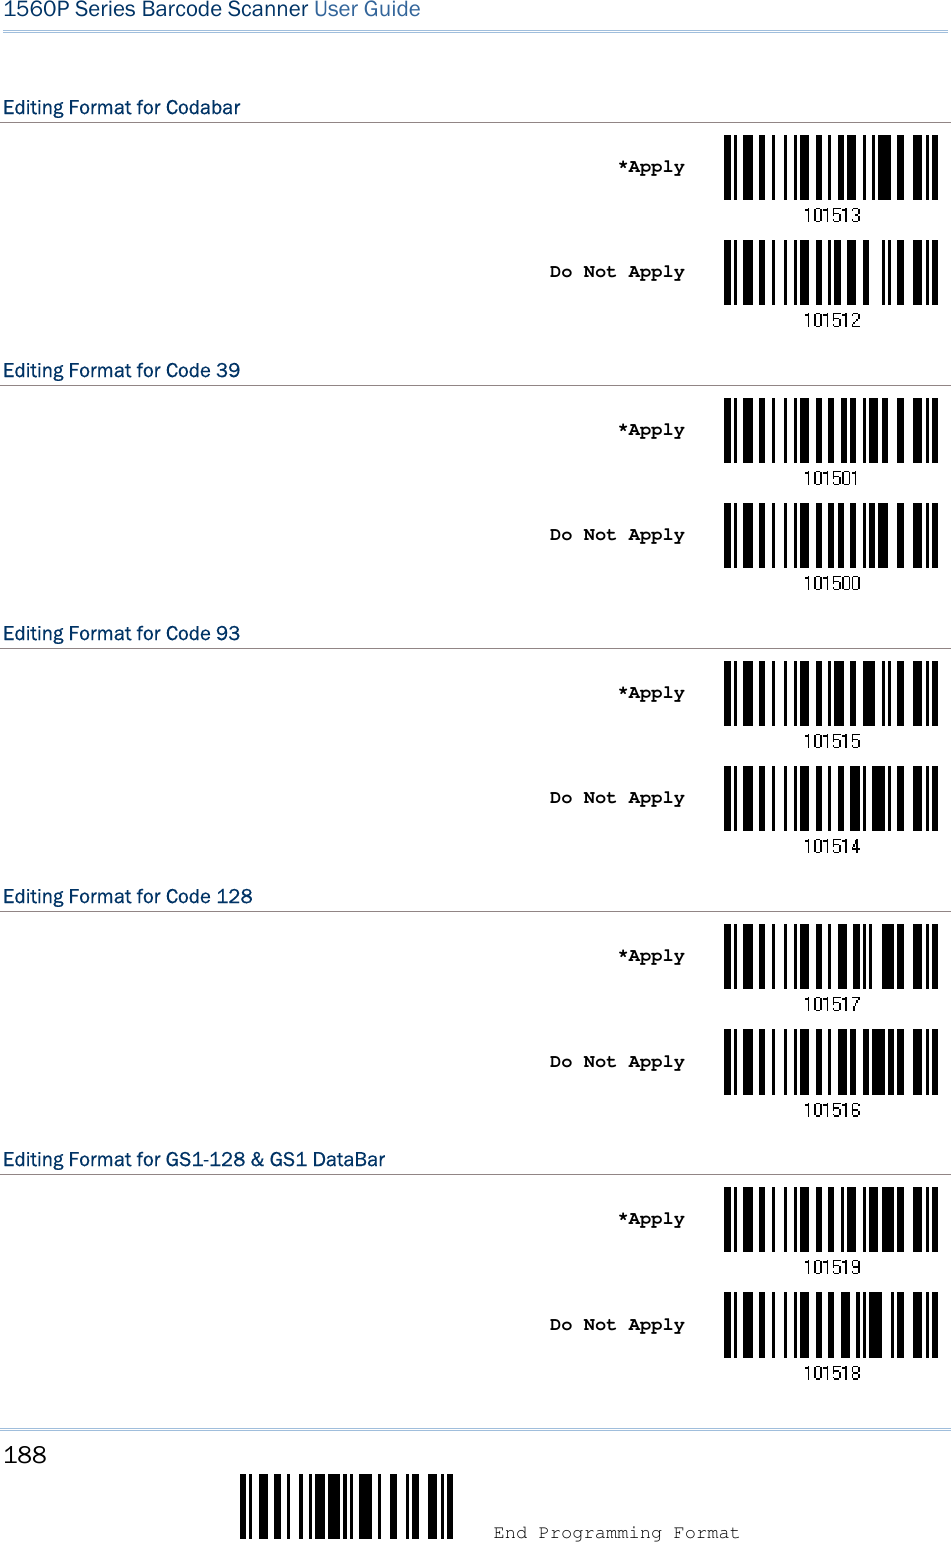 188  End Programming Format 1560P Series Barcode Scanner User Guide Editing Format for Codabar *ApplyDo Not Apply Editing Format for Code 39 *ApplyDo Not Apply Editing Format for Code 93 *ApplyDo Not Apply Editing Format for Code 128 *ApplyDo Not Apply Editing Format for GS1-128 &amp; GS1 DataBar *ApplyDo Not Apply 